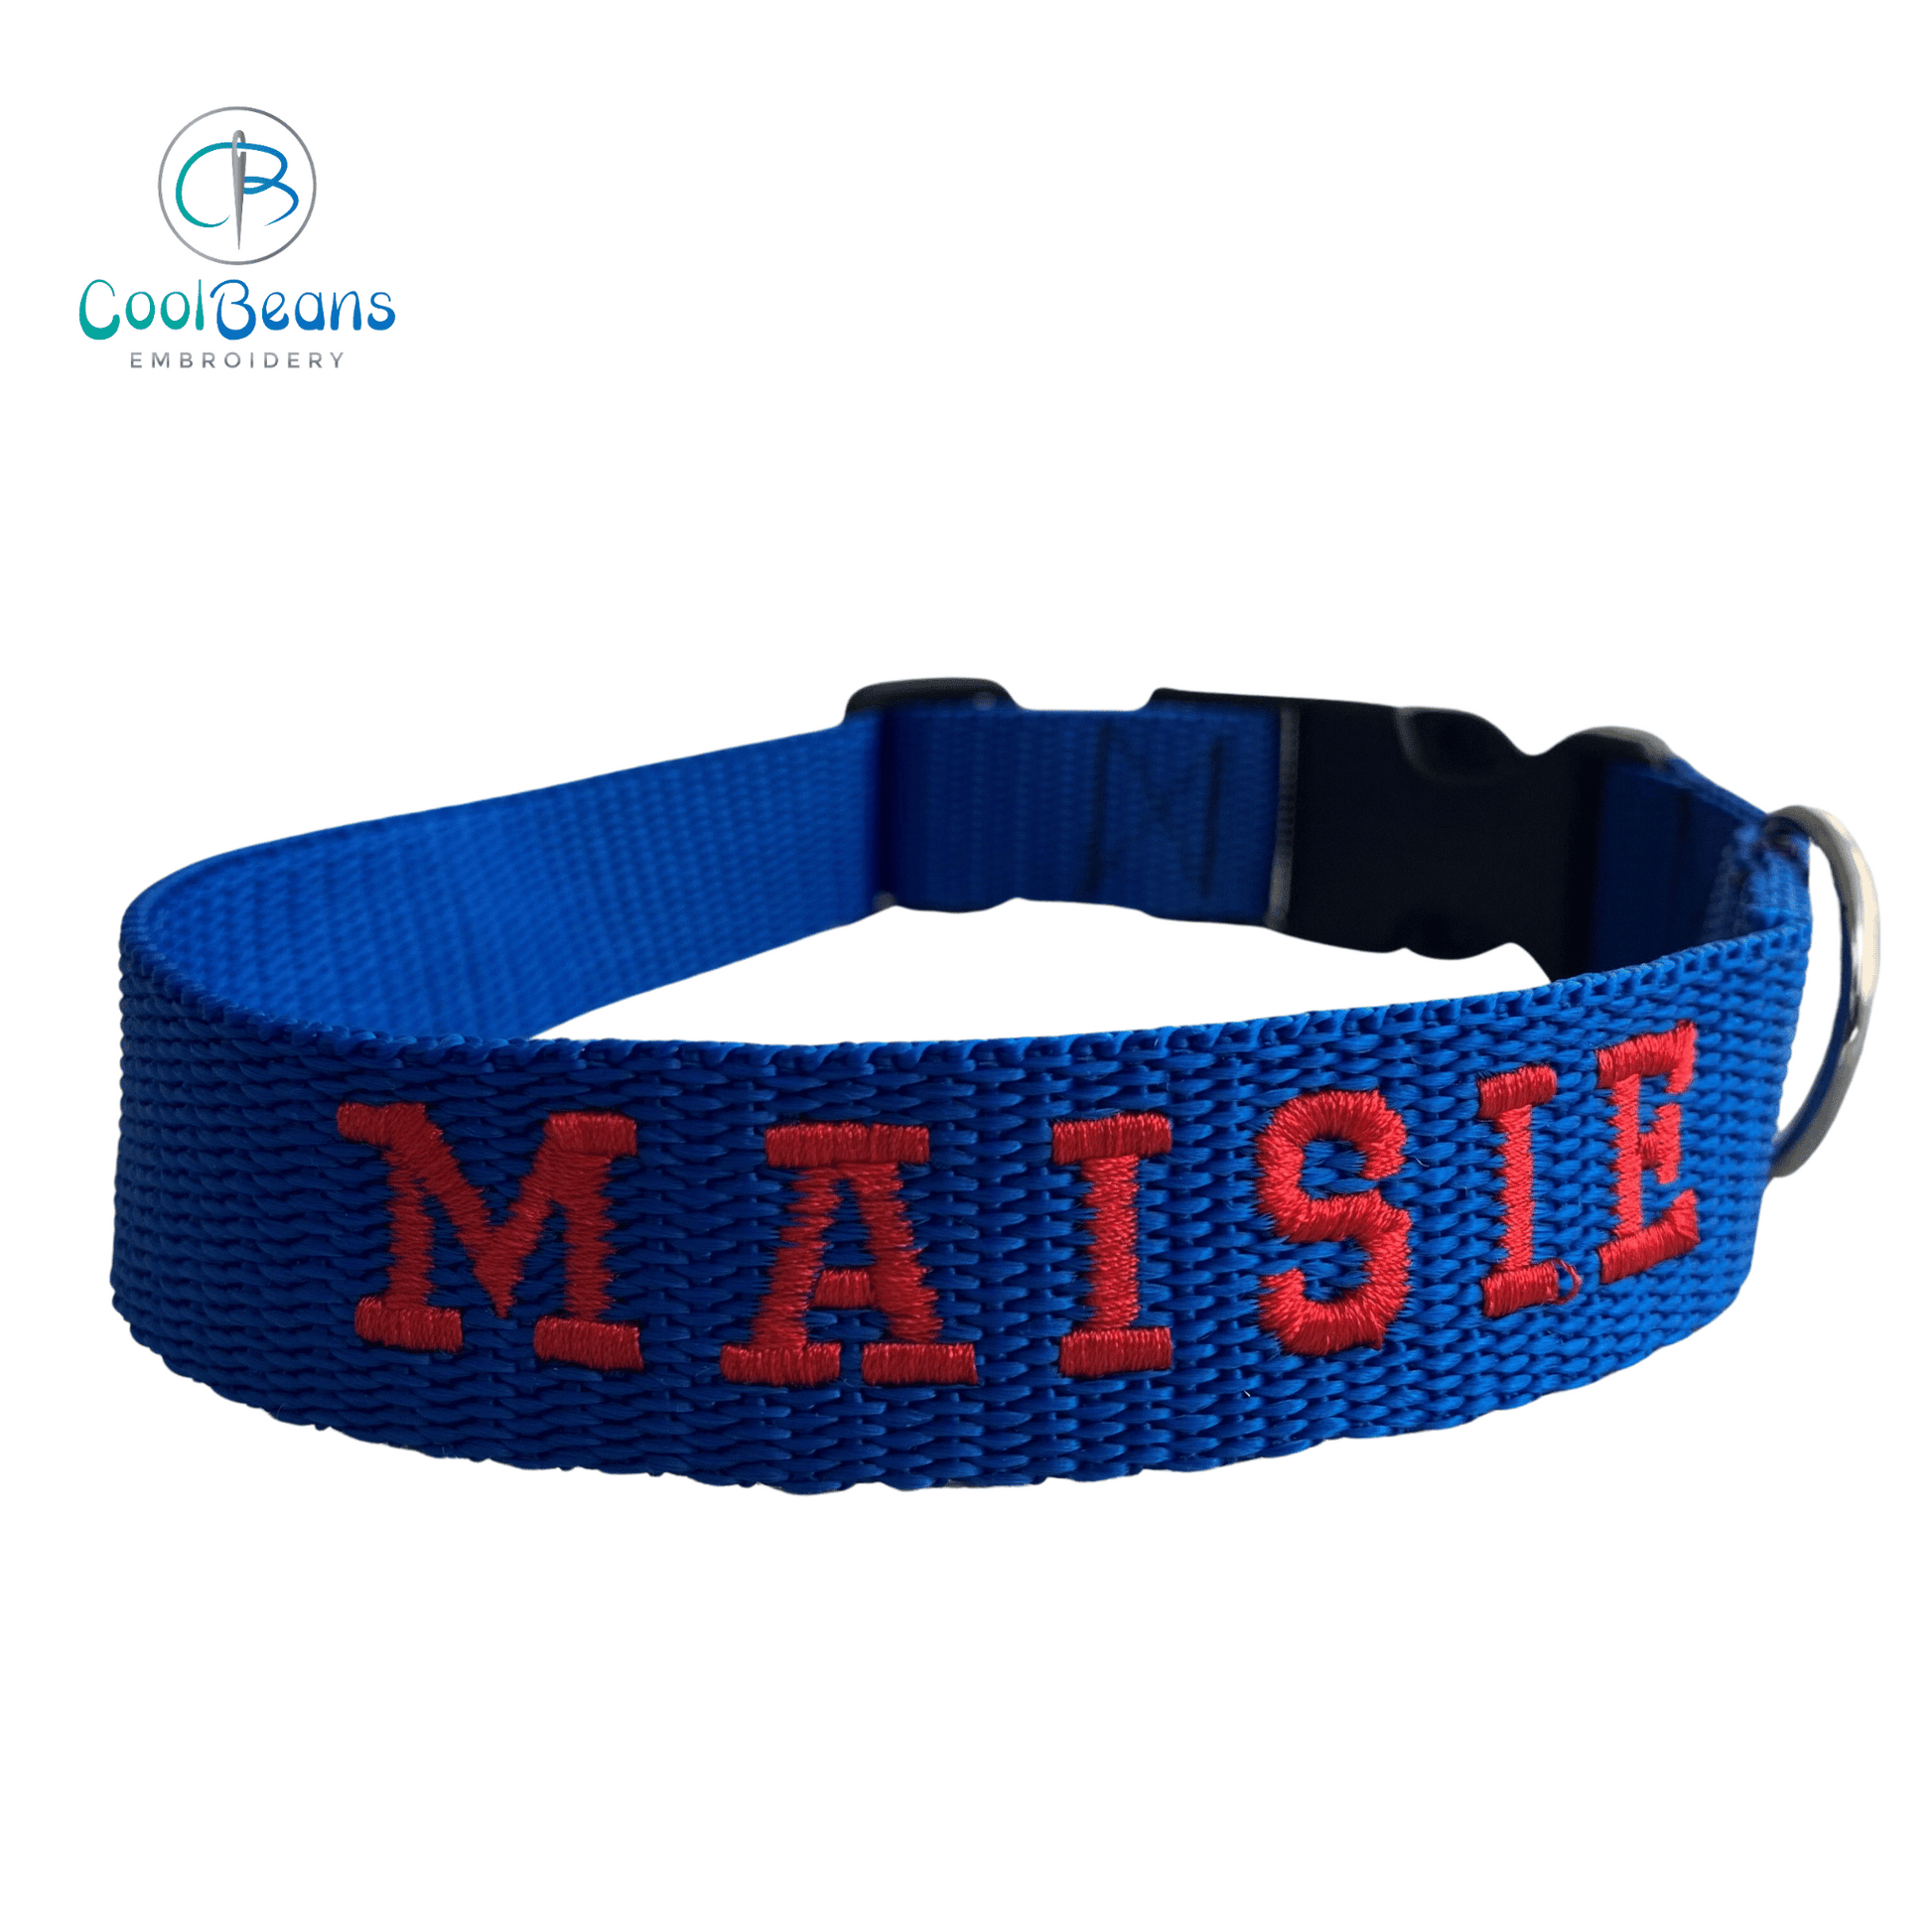 Dog Collar - Webbing - Handcrafted - Personalised - 25mm - Cool Beans Embroidery & Personalisation